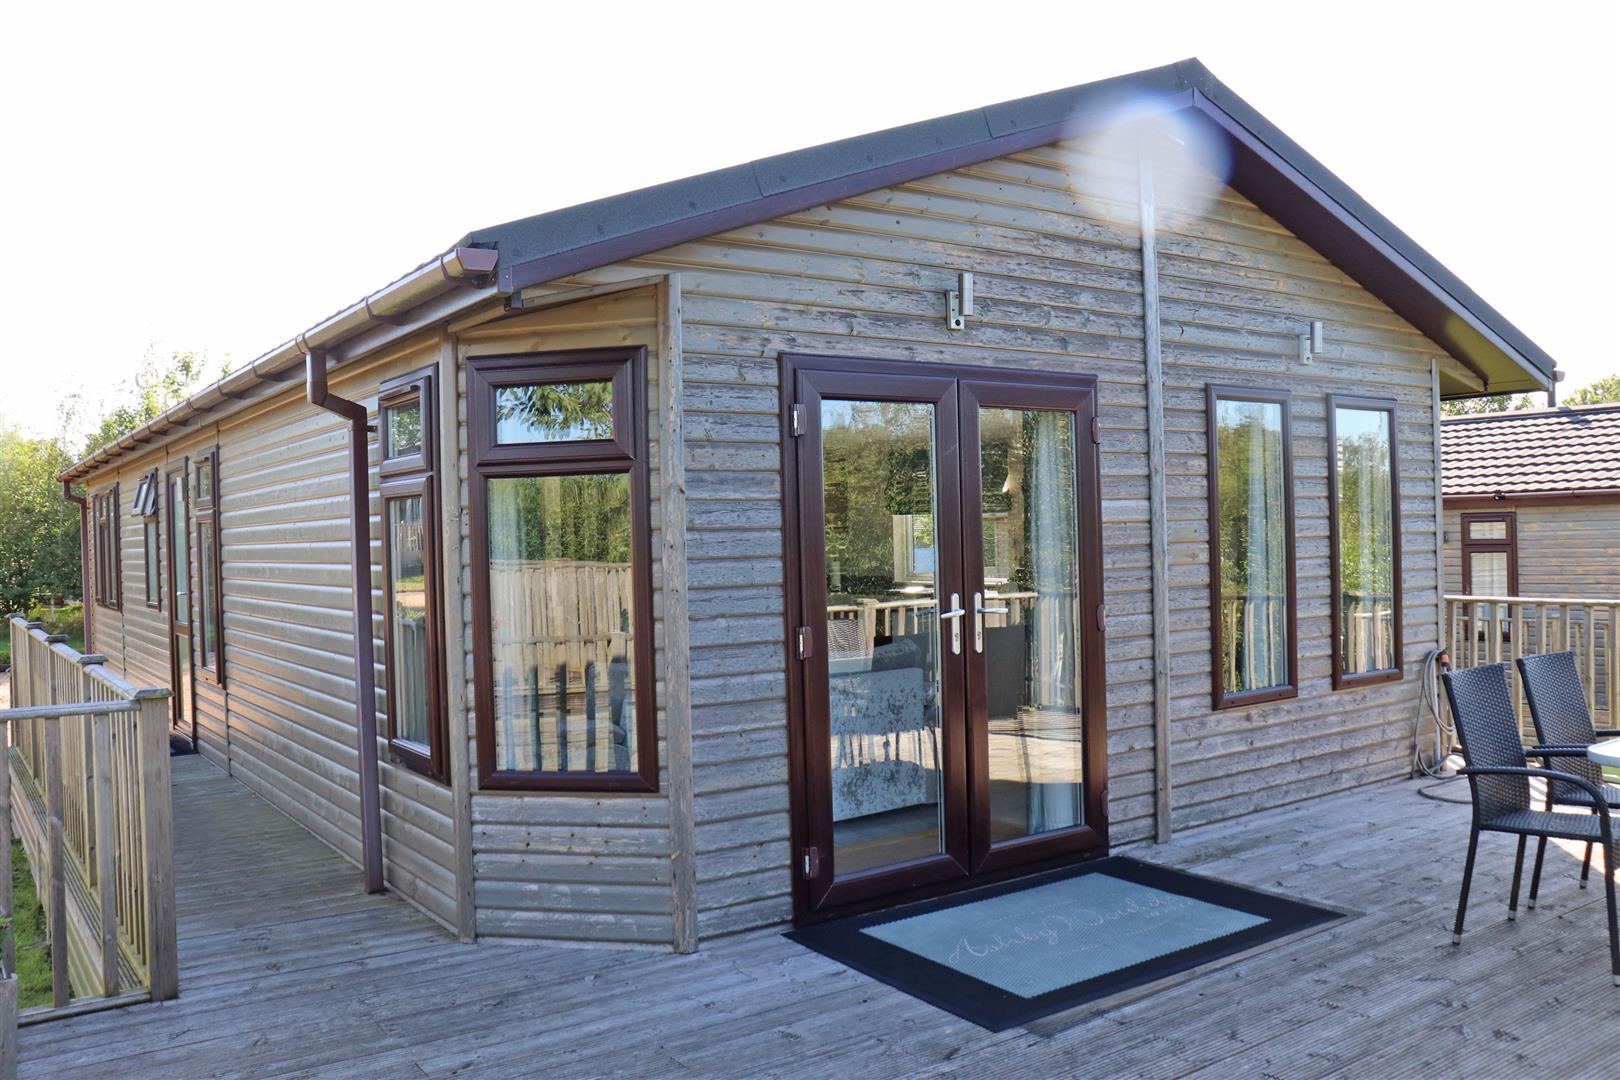 Property image for Ashby Woulds Lodges, Overseal,